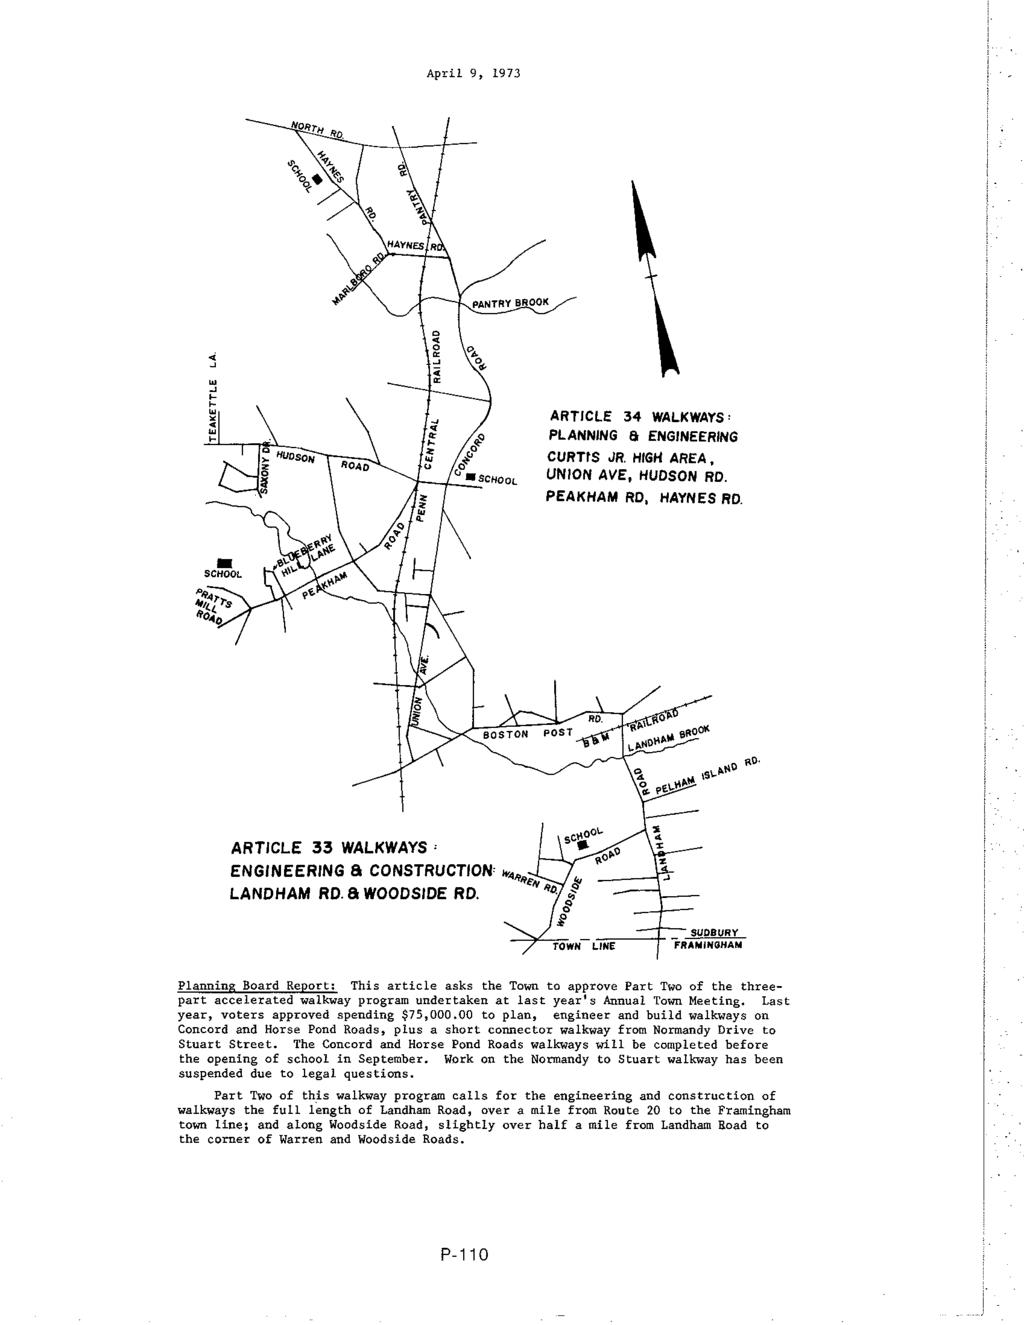 April 9, 1973 ARTICLE 34 WALKWAYS PLANNING a ENGINEERING CURTIS JR. HIGH AREA, UNION AVE, HUDSON RD. PEAKHAM RD, HAYNES RD. ARTICLE 33 WALKWAYS ' ENGINEERING a CONSTRUCTION LAND HAM RD. a WOODSIDE RD.